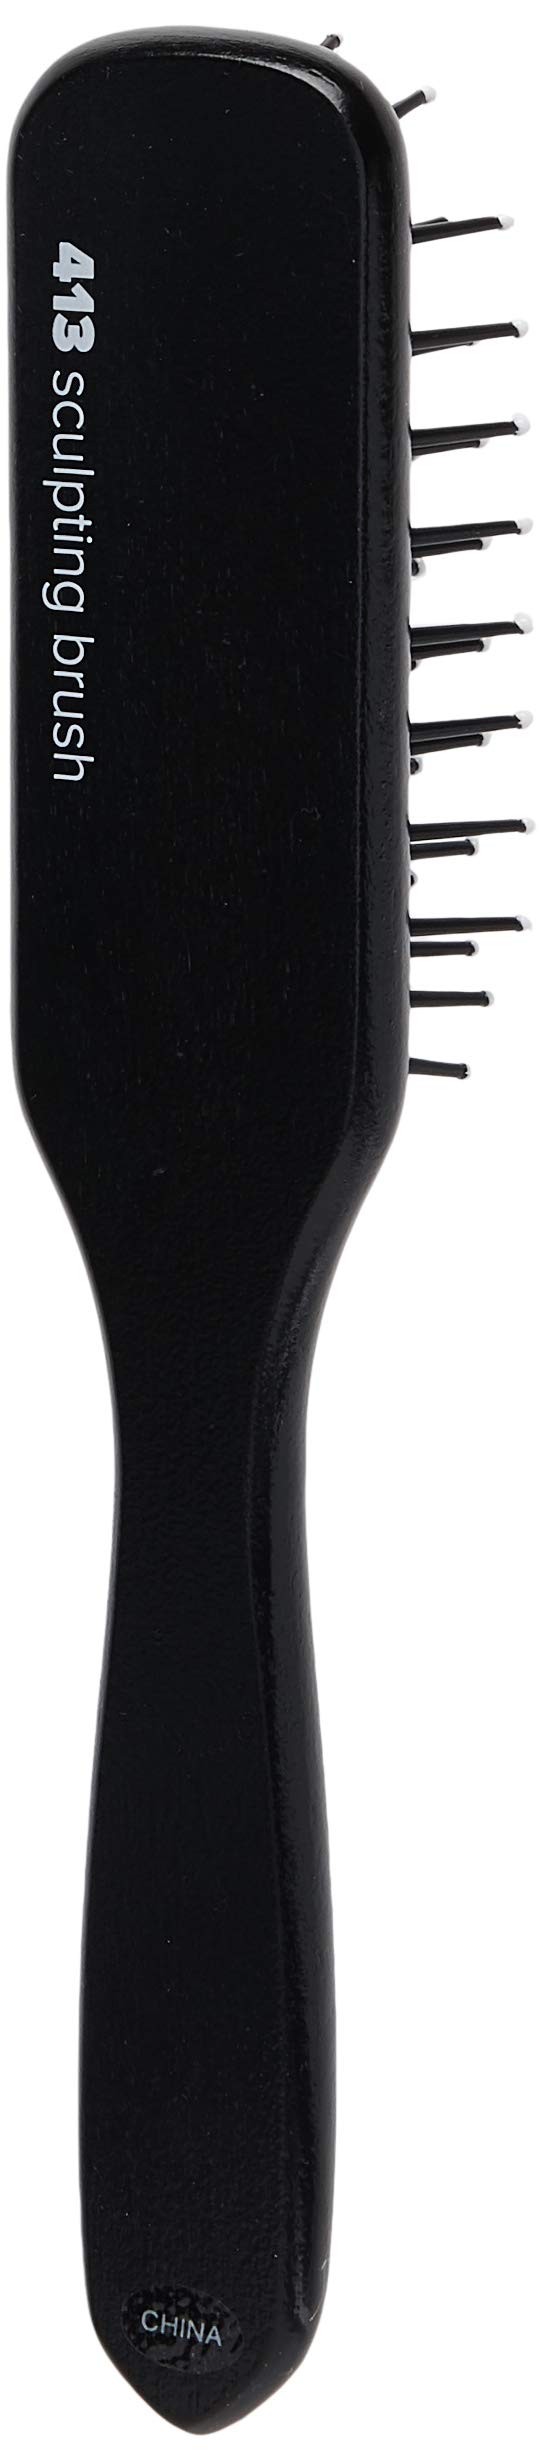 Paul Mitchell Pro Tools 413 Sculpting Brush, Classic Hair Brush for Detangling, Sculpting + Styling Wet or Dry Hair